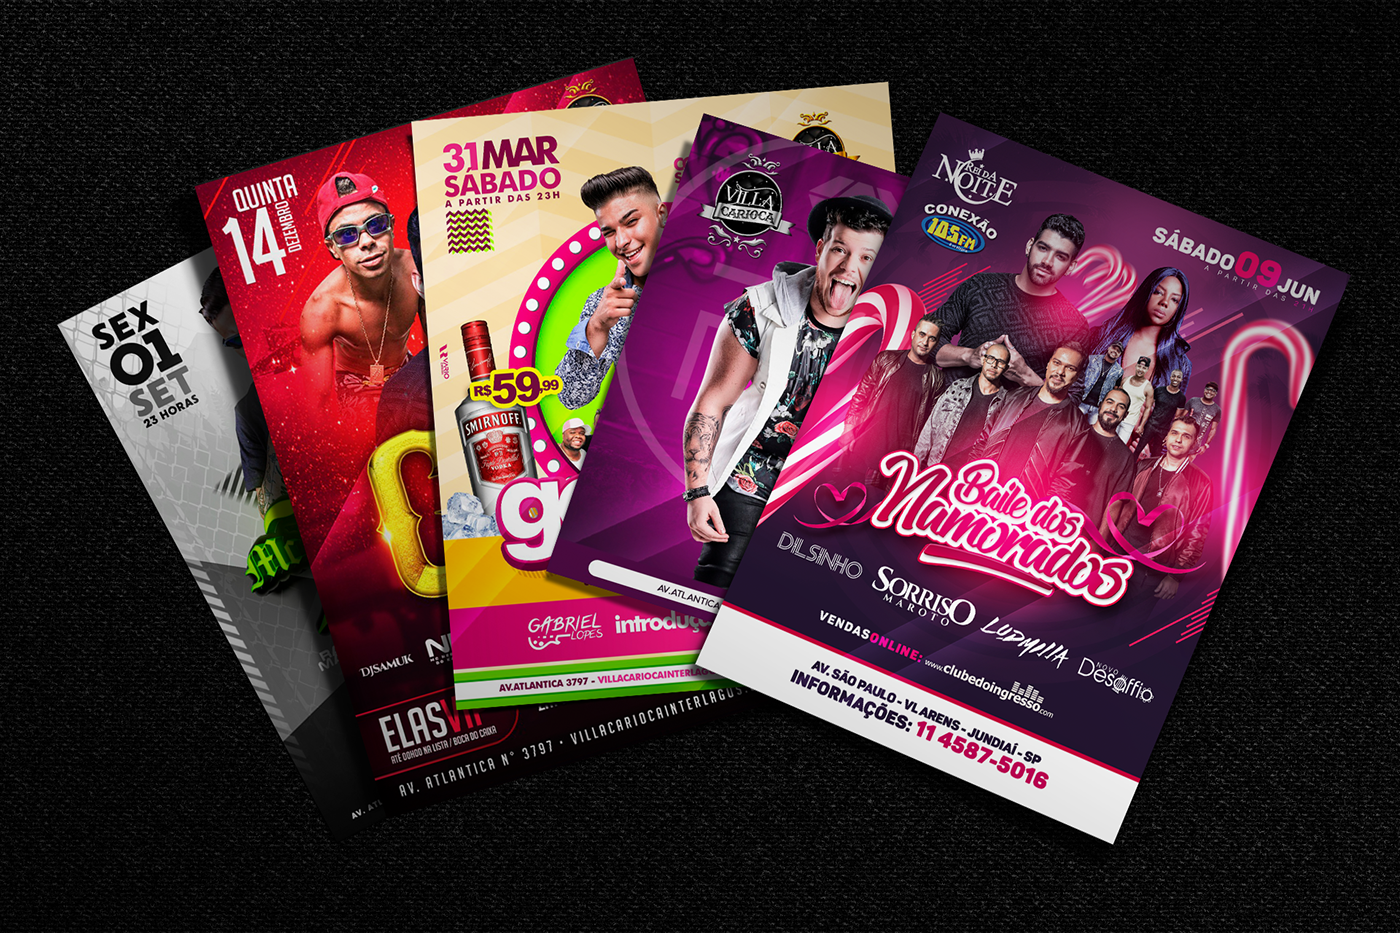 flyer Event music party balada